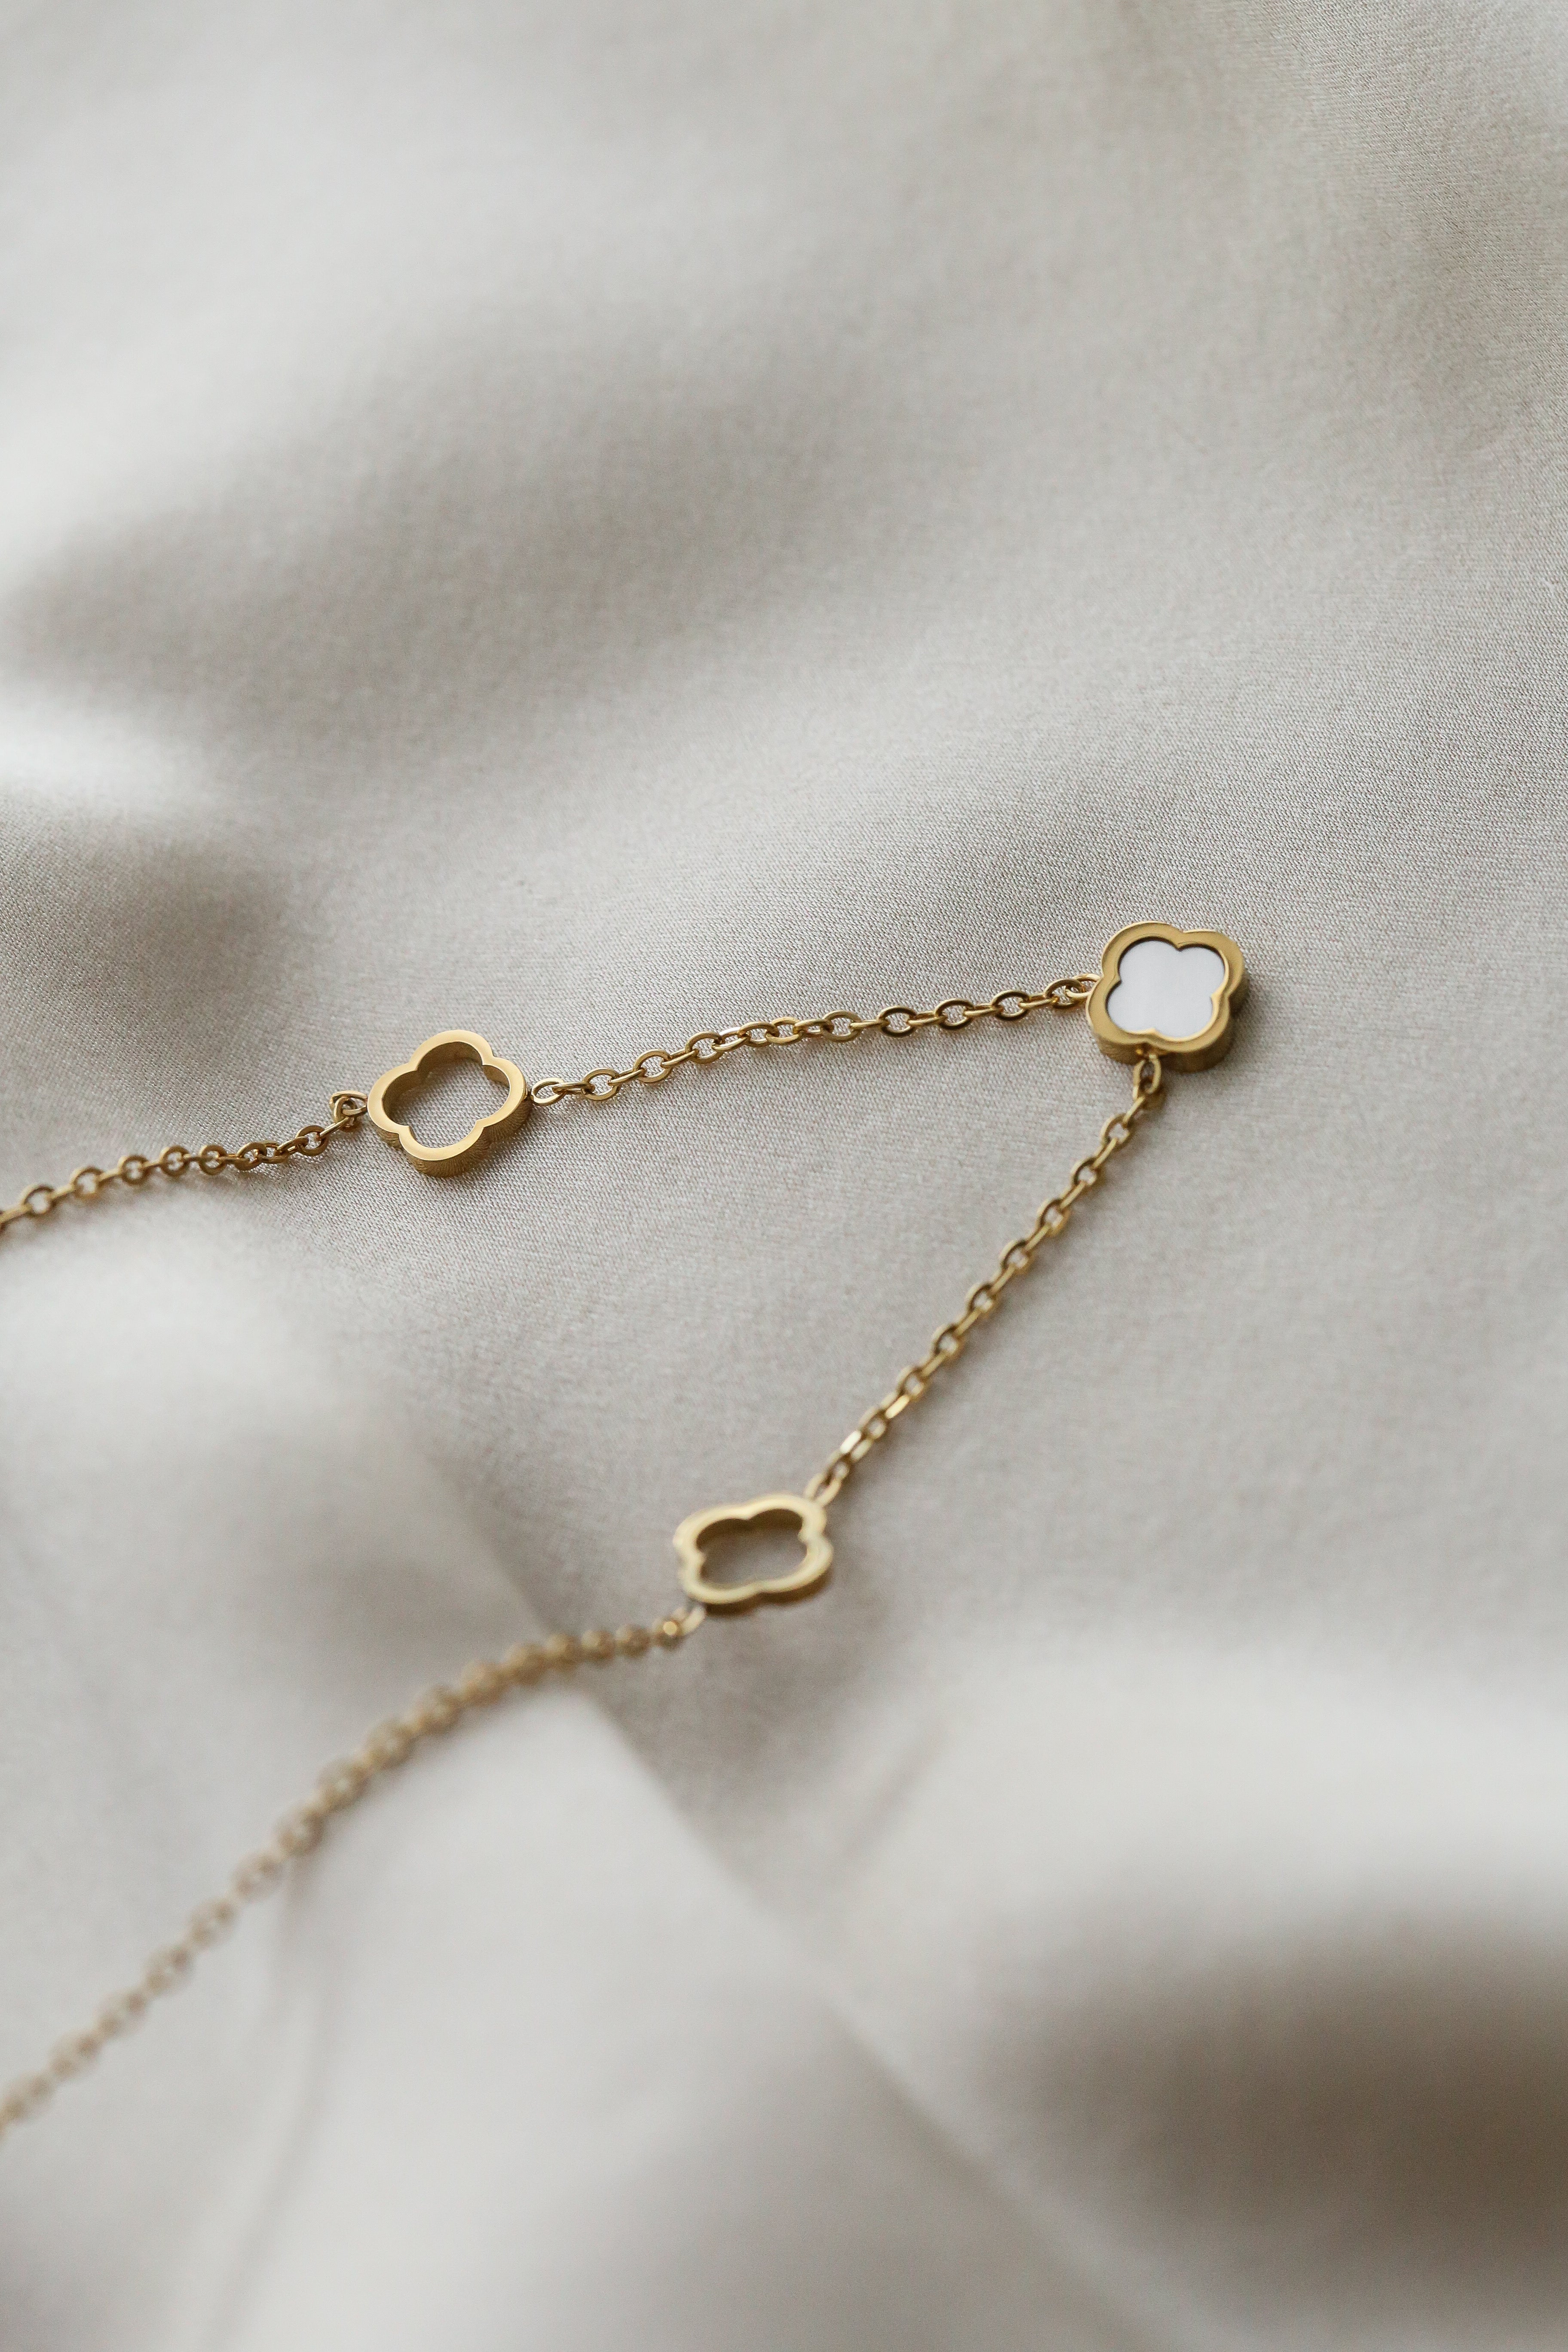 Viola Necklace - Boutique Minimaliste has waterproof, durable, elegant and vintage inspired jewelry